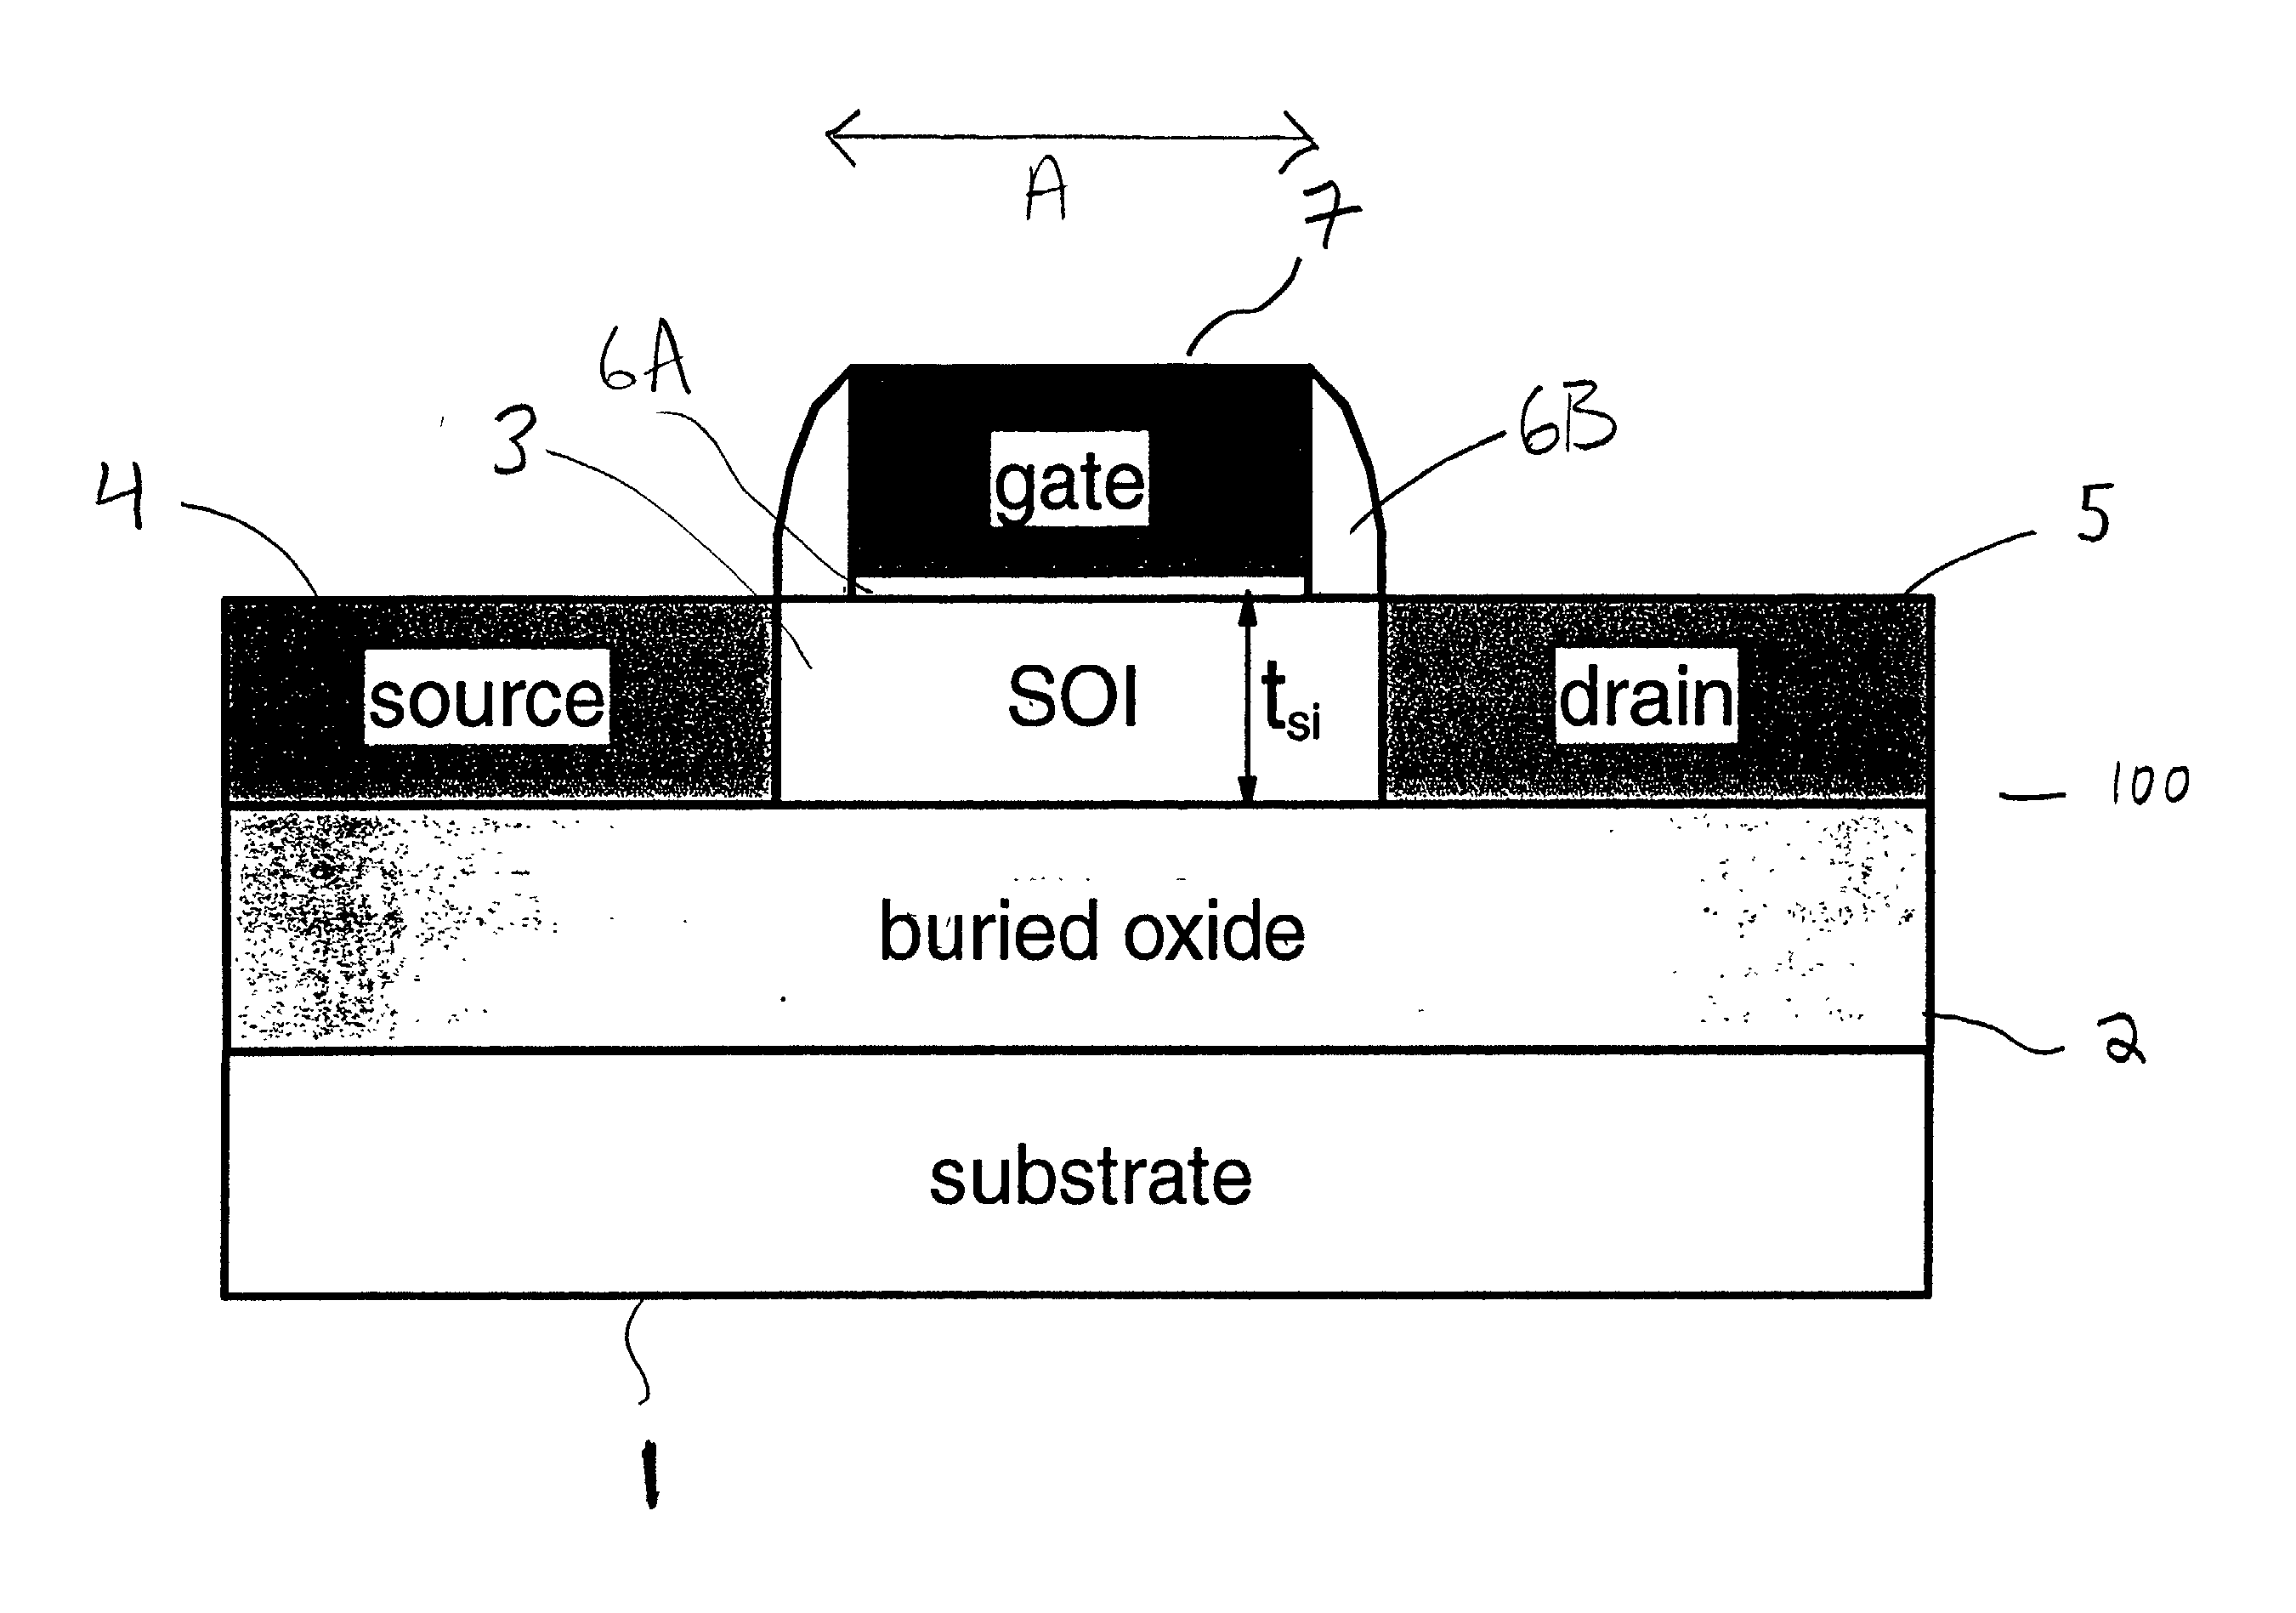 Self-aligned silicone process for low resistivity contacts to thin film silicon-on-insulator mosfets